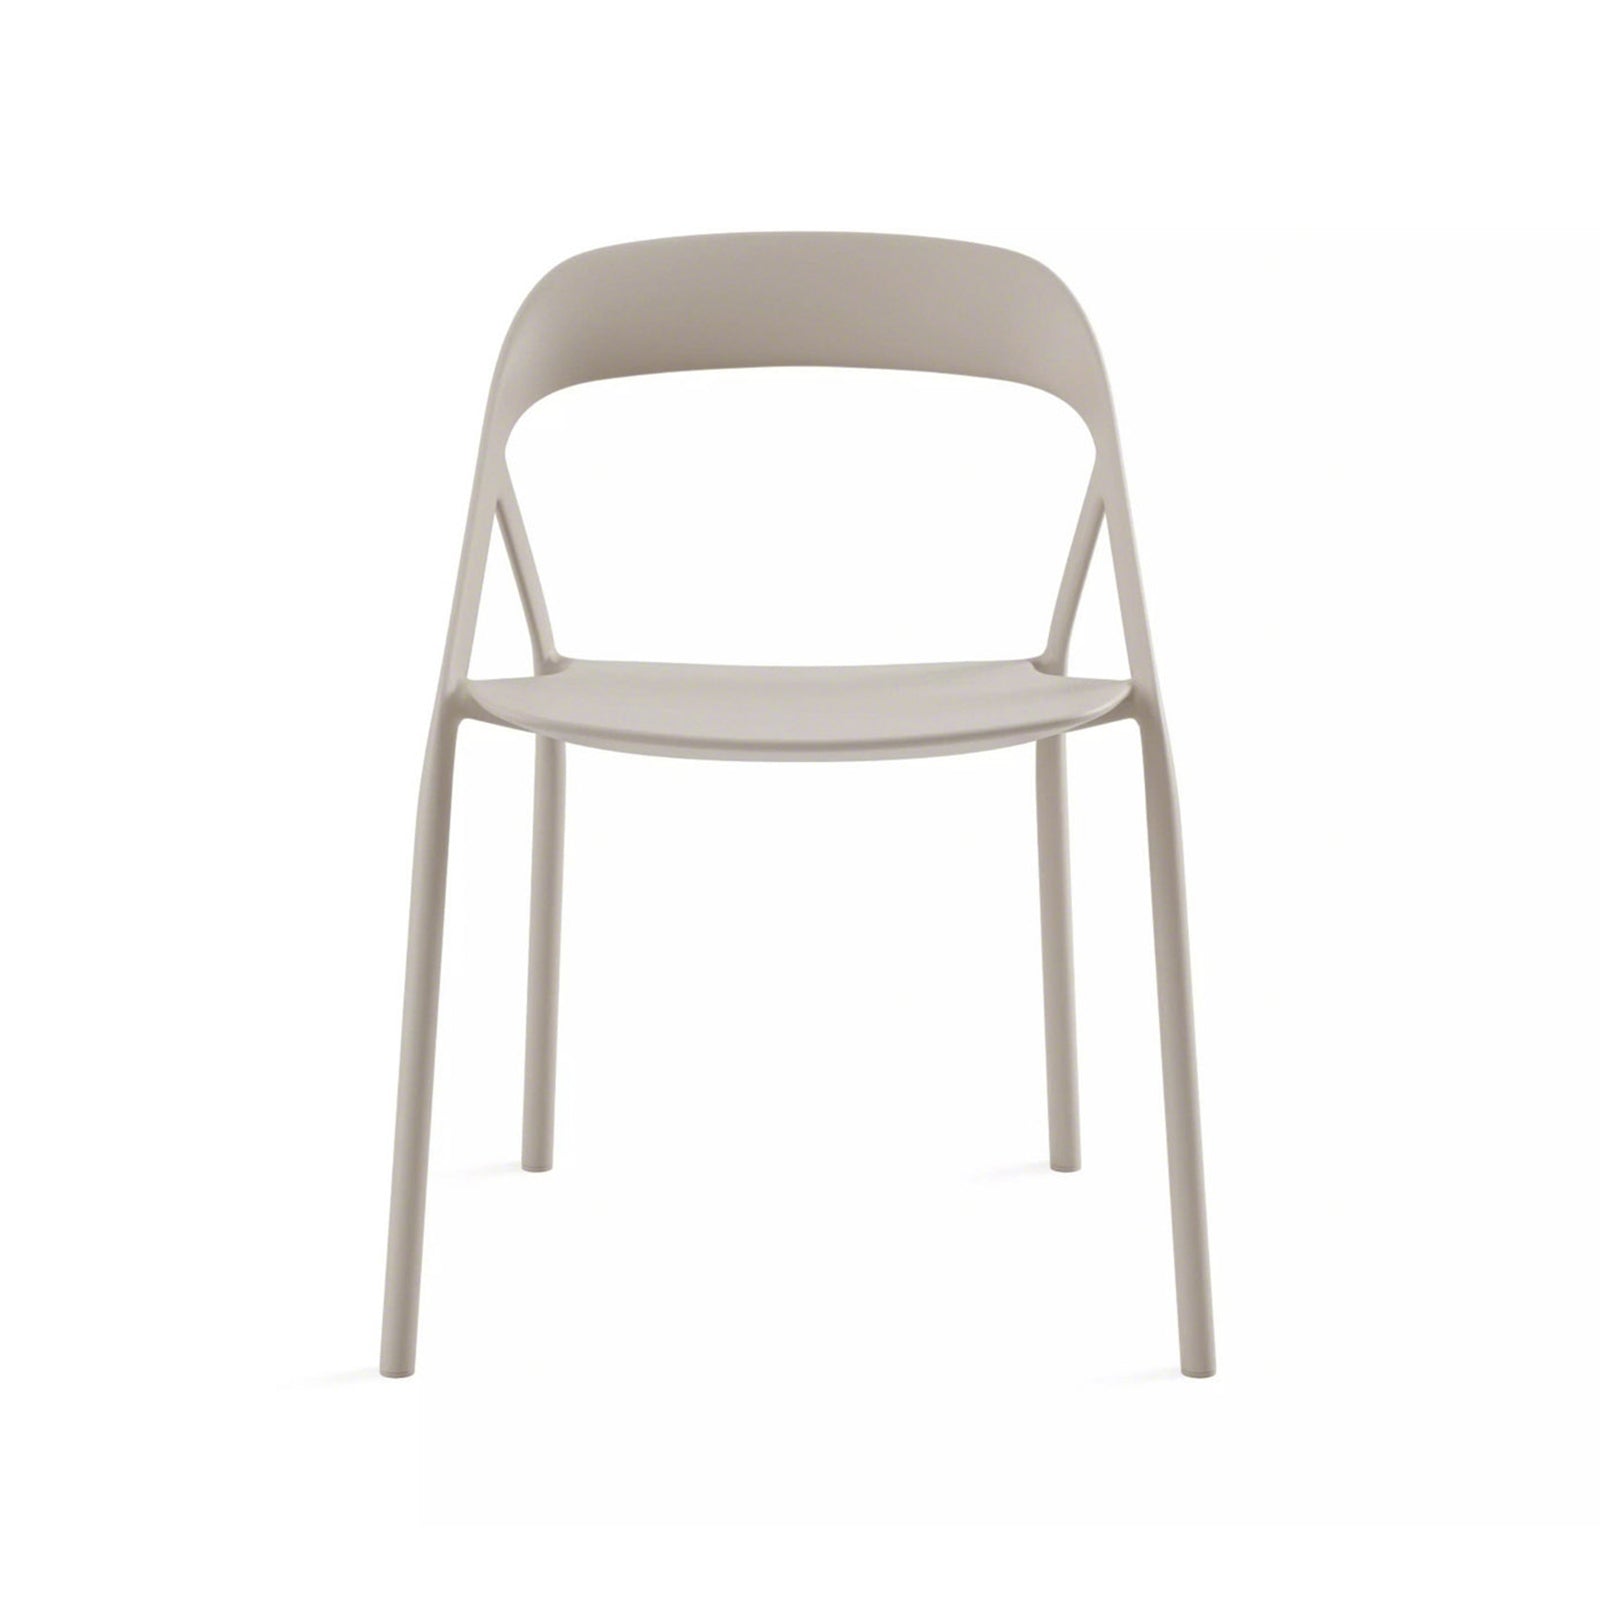 LessThanFive Chair